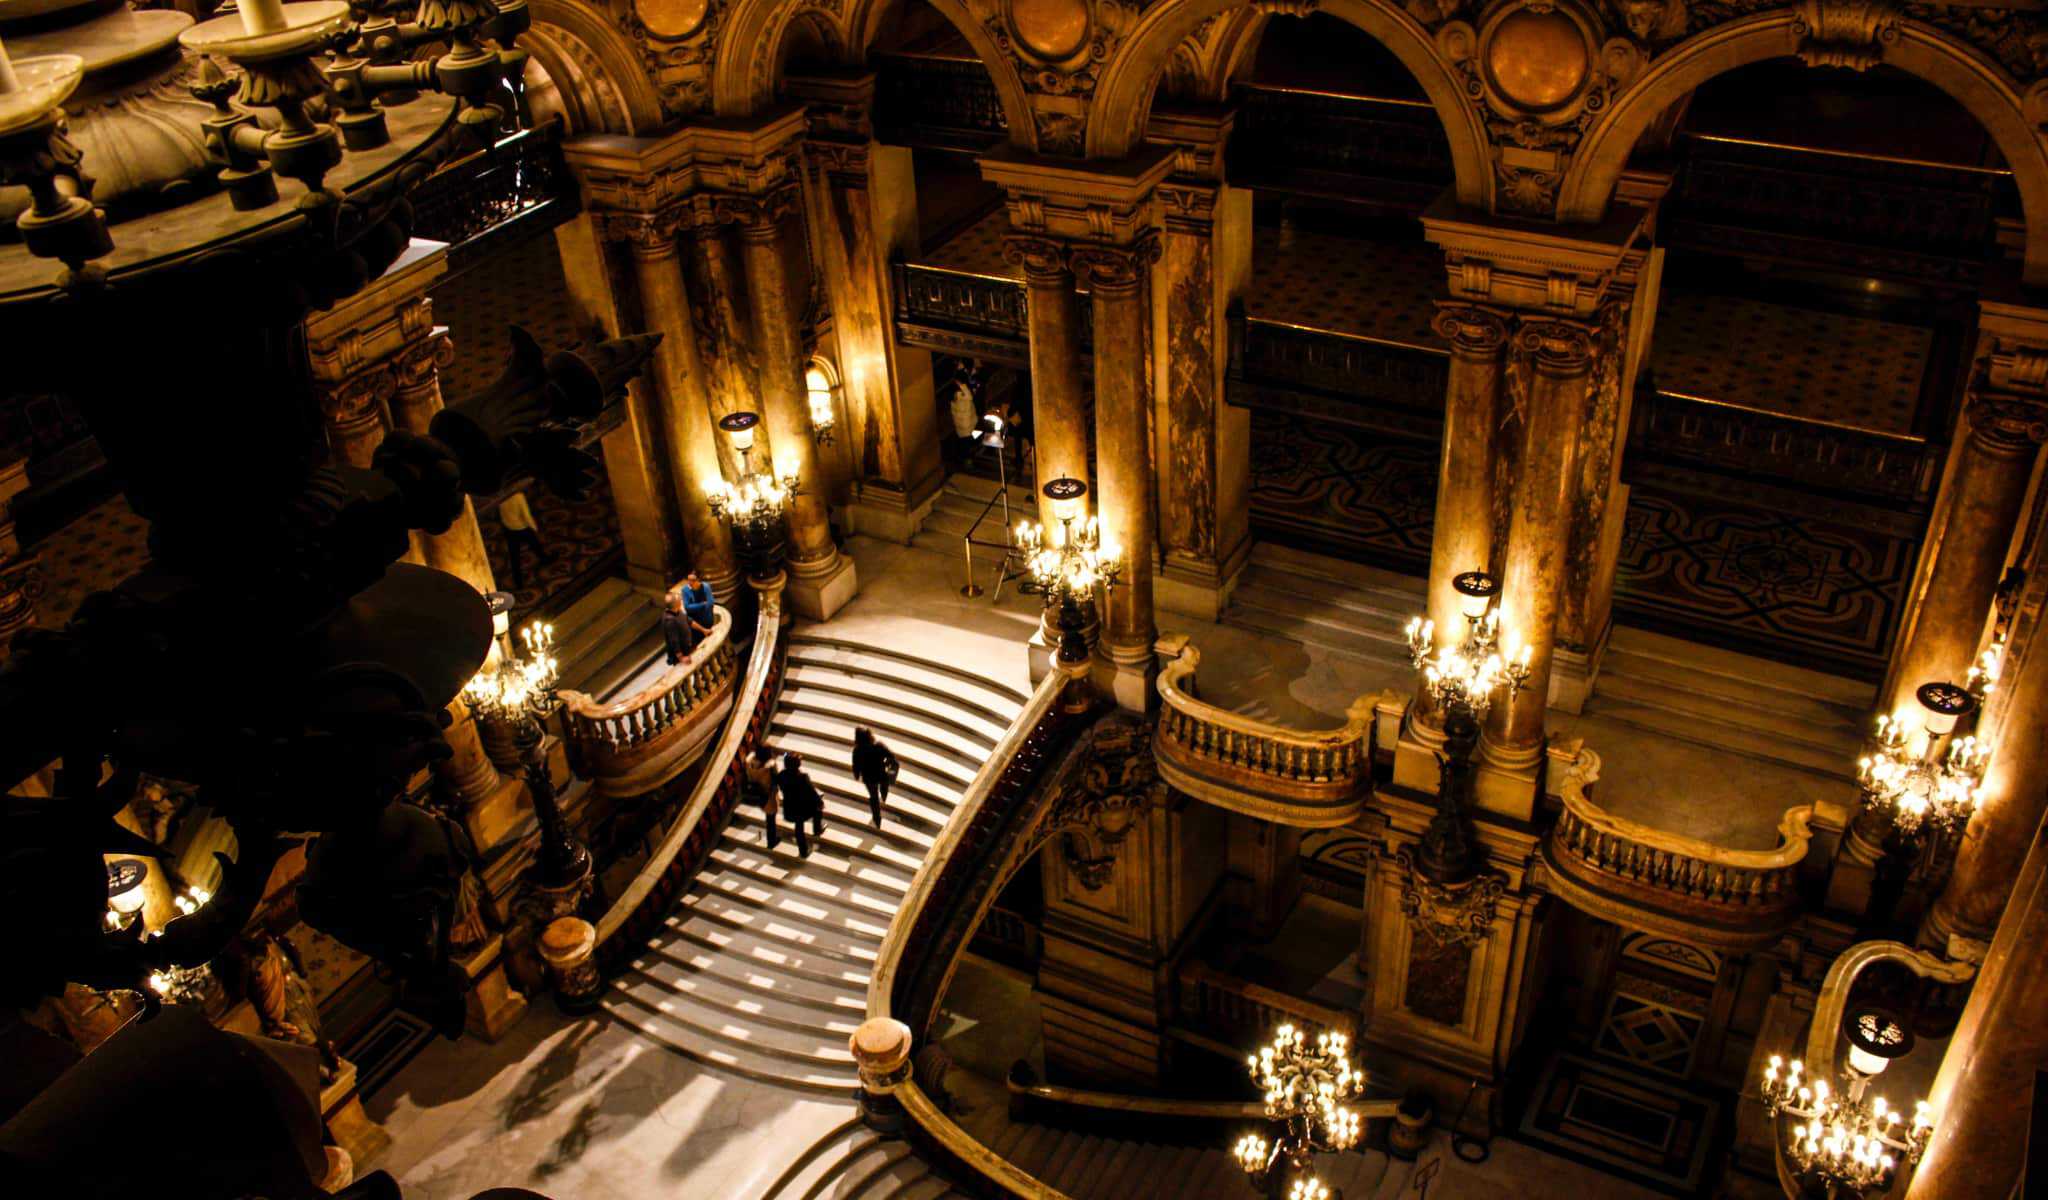 A staircase in Opera Palais Garnier Paris which has gilded interiors reminiscent of the belle epoque